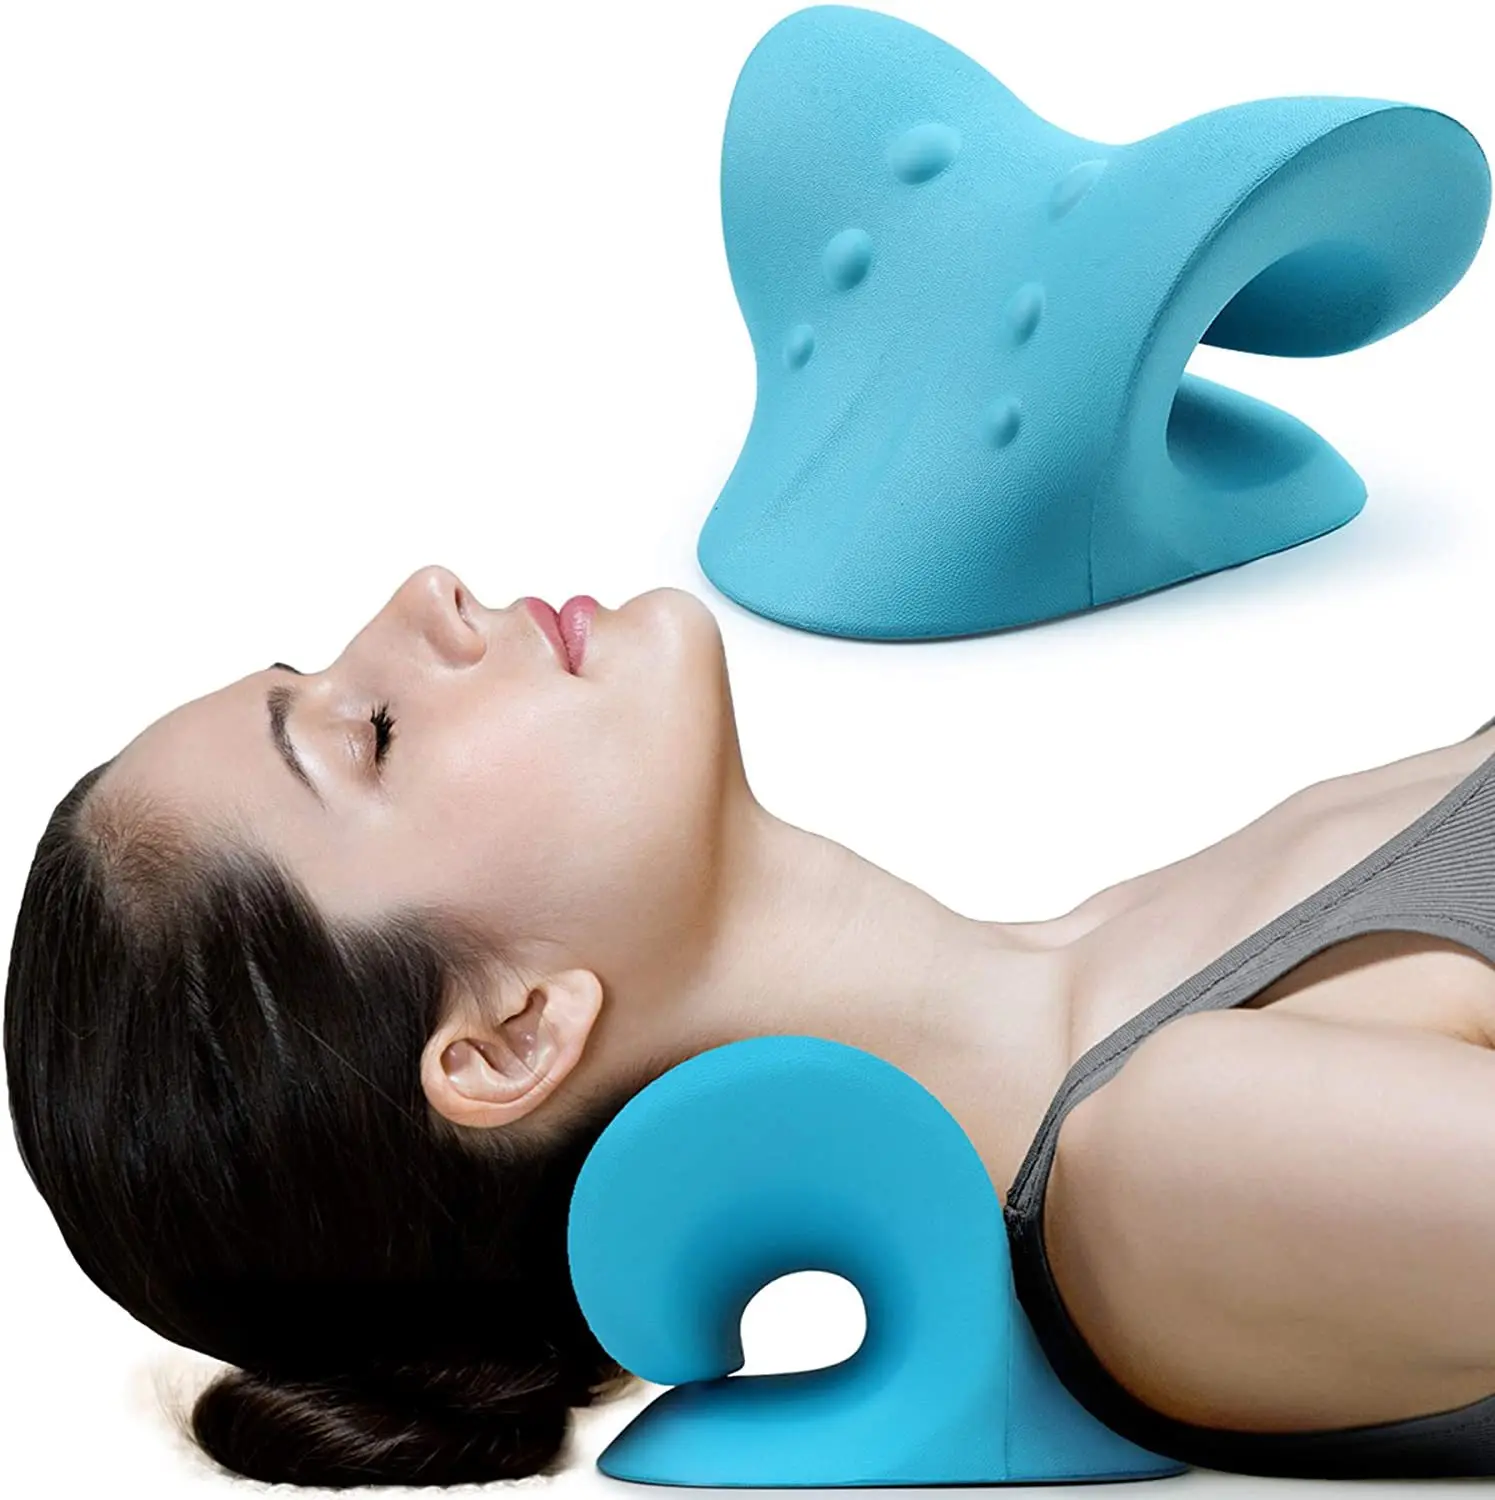 

Pillow Neck Shoulder Relaxer Cervical Traction Device For TMJ Pain Relief Cervical Spine Alignment Chiropractic Neck Stretcher